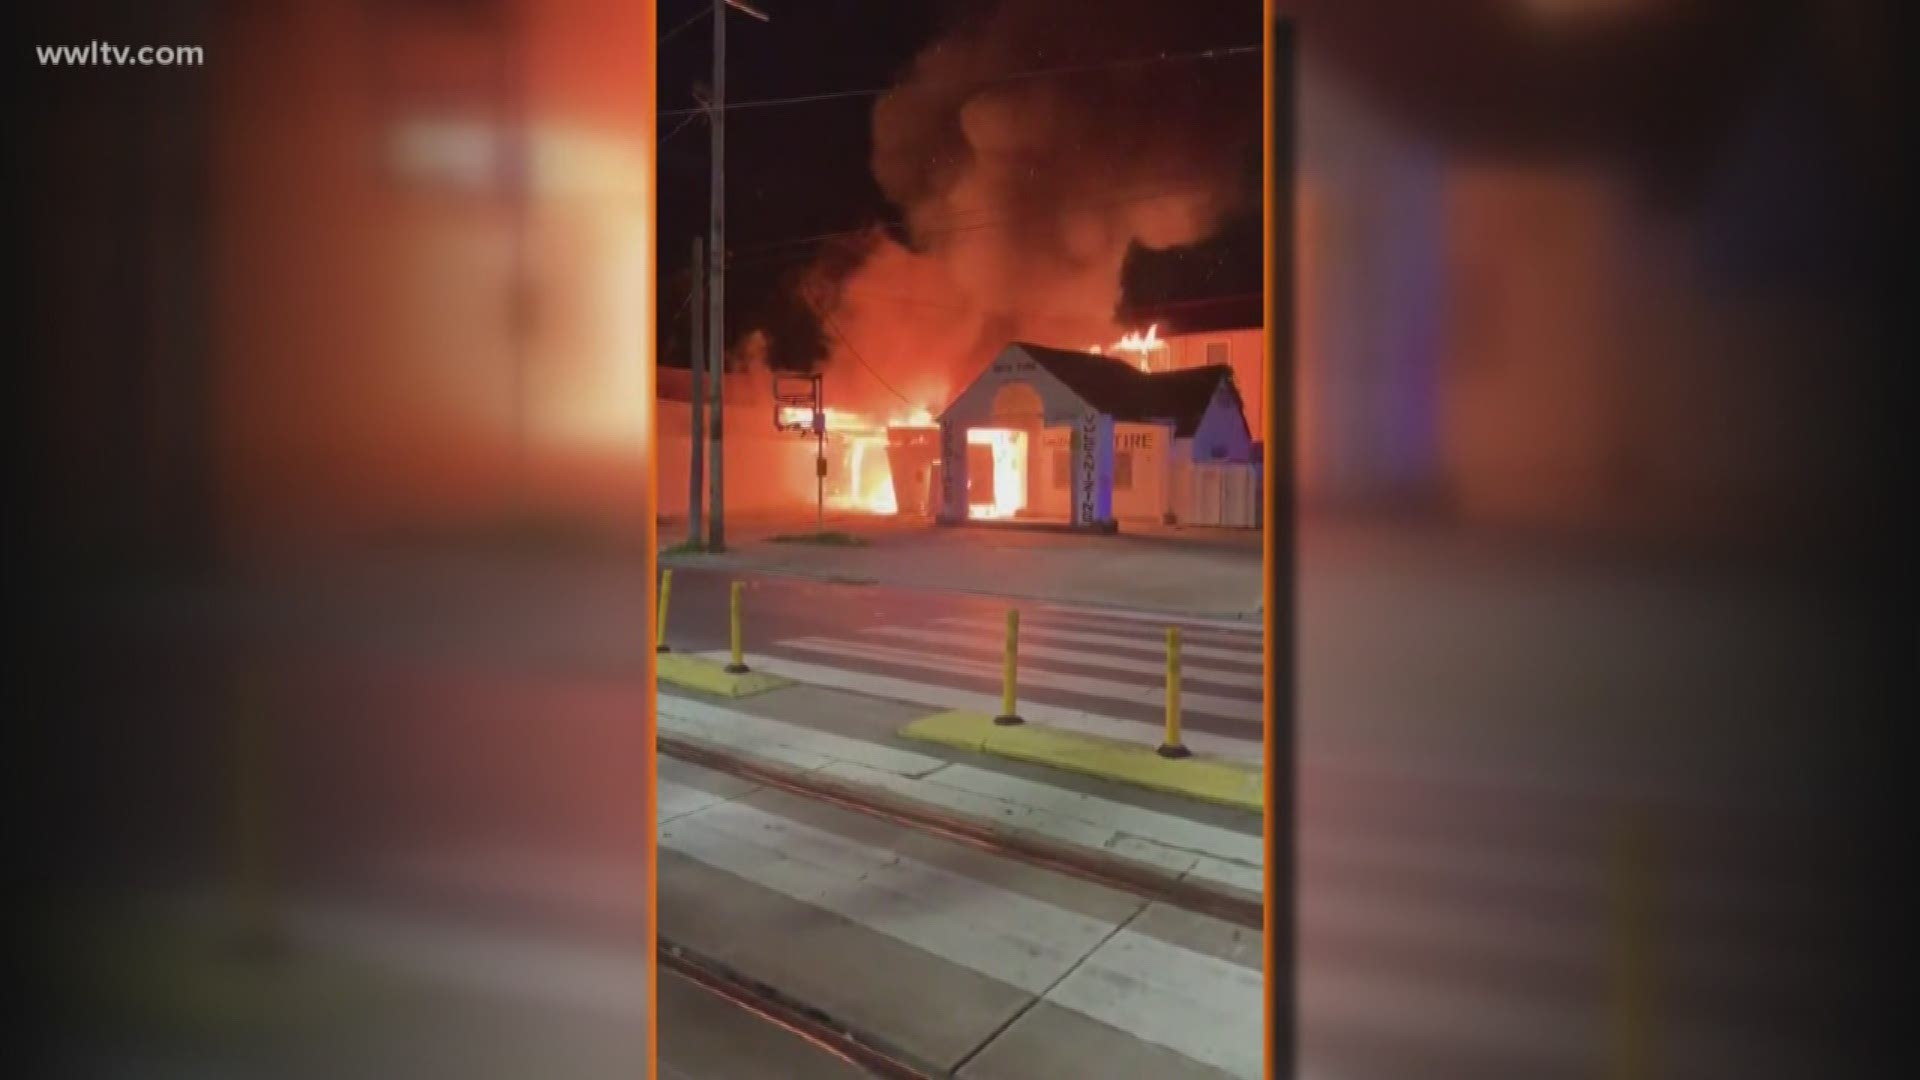 According to the New Orleans Fire Department, the fire started just after midnight near the intersection of Frenchmen Street.